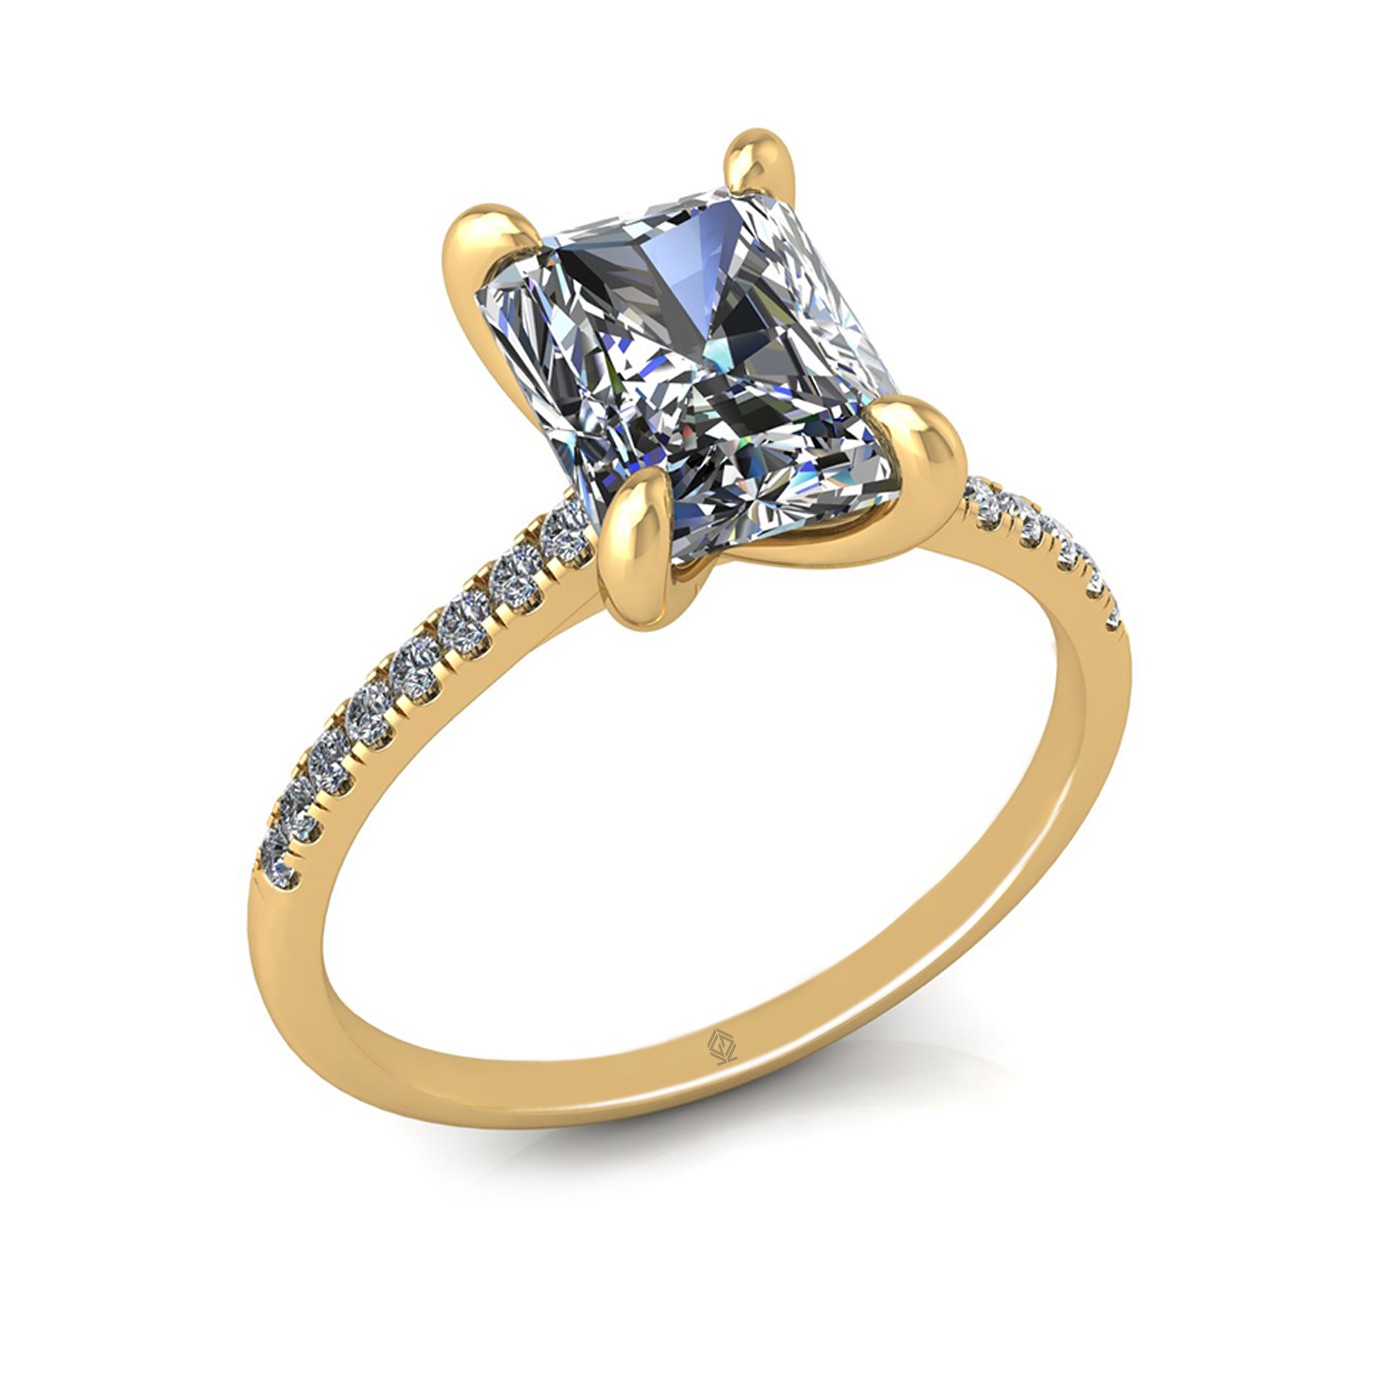 18k yellow gold  2,50 ct 4 prongs radiant cut diamond engagement ring with whisper thin pavÉ set band